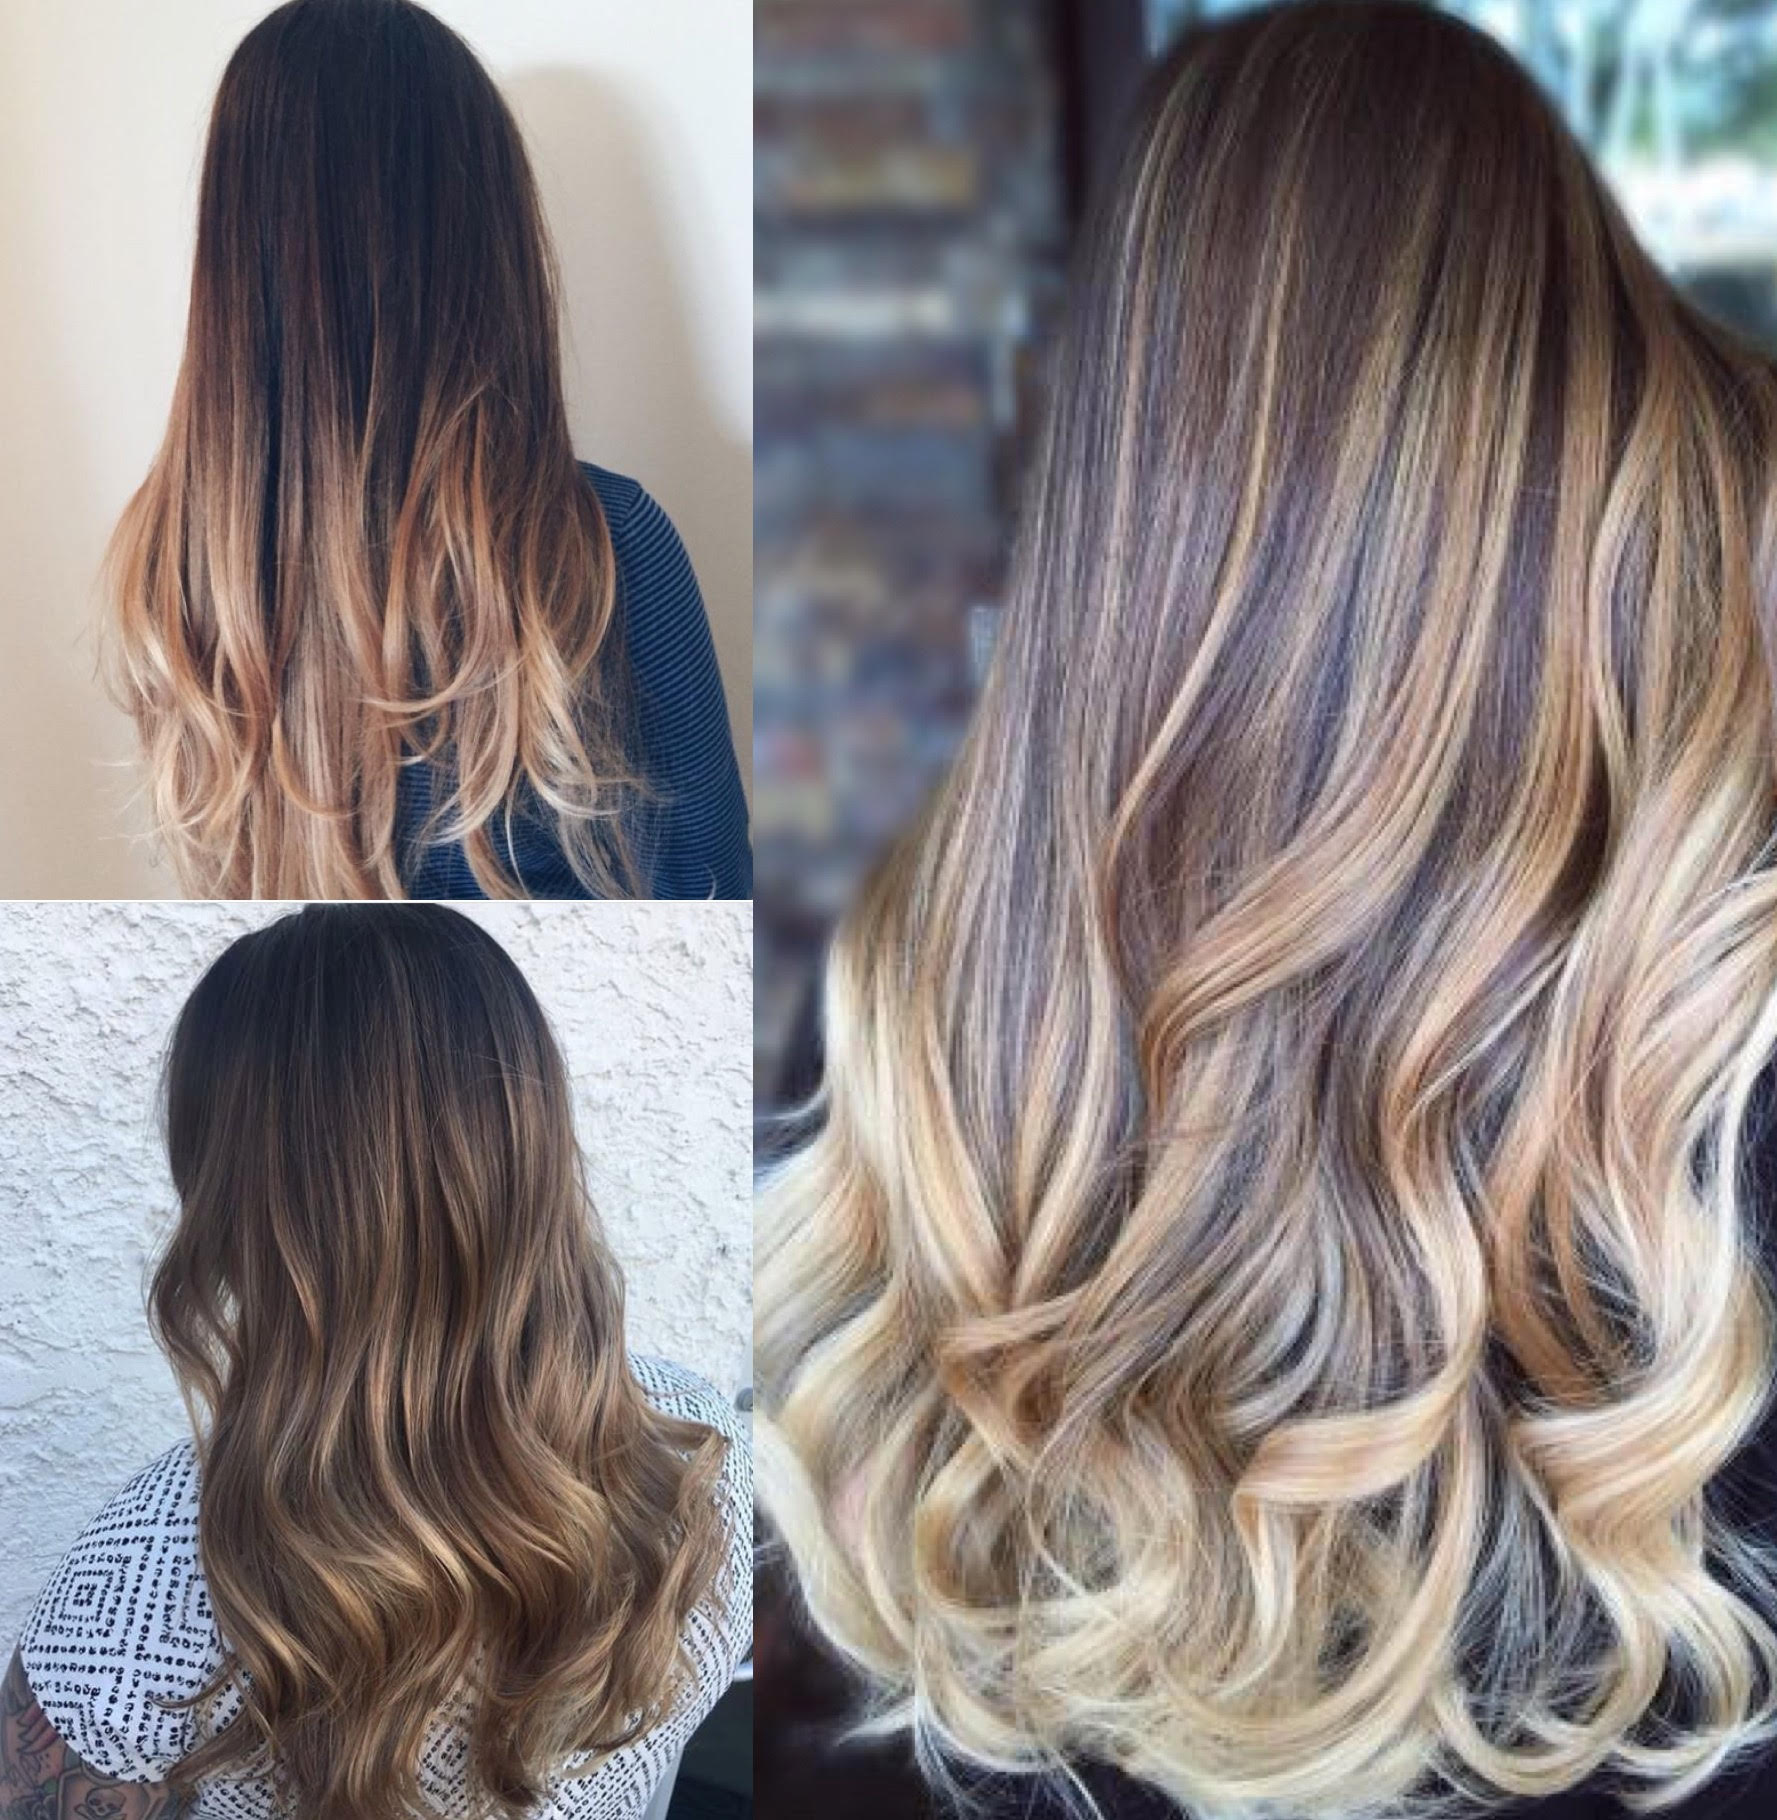 The Differences Between Color Melting, Balayage, and Ombre - The Salon At  10 Newbury | The Salon At 10 Newbury